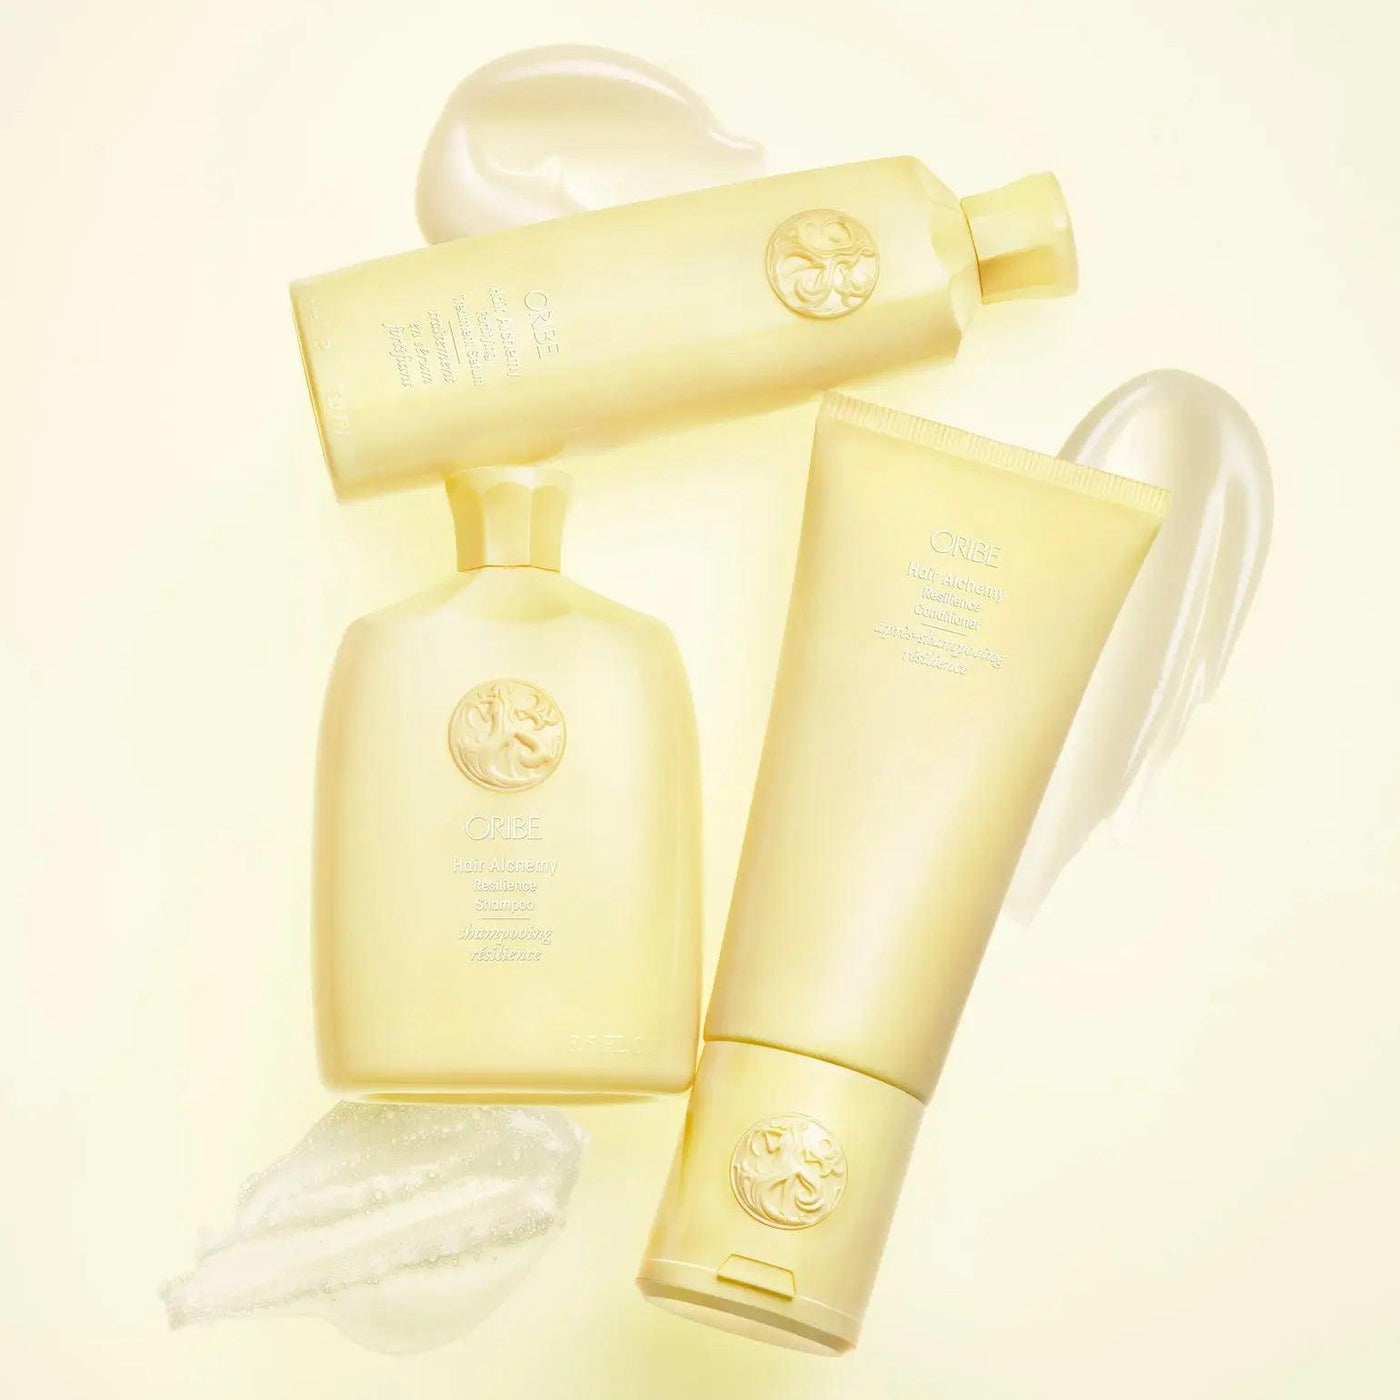 Hair Alchemy Resilience Shampoo Oribe Boutique Deauville